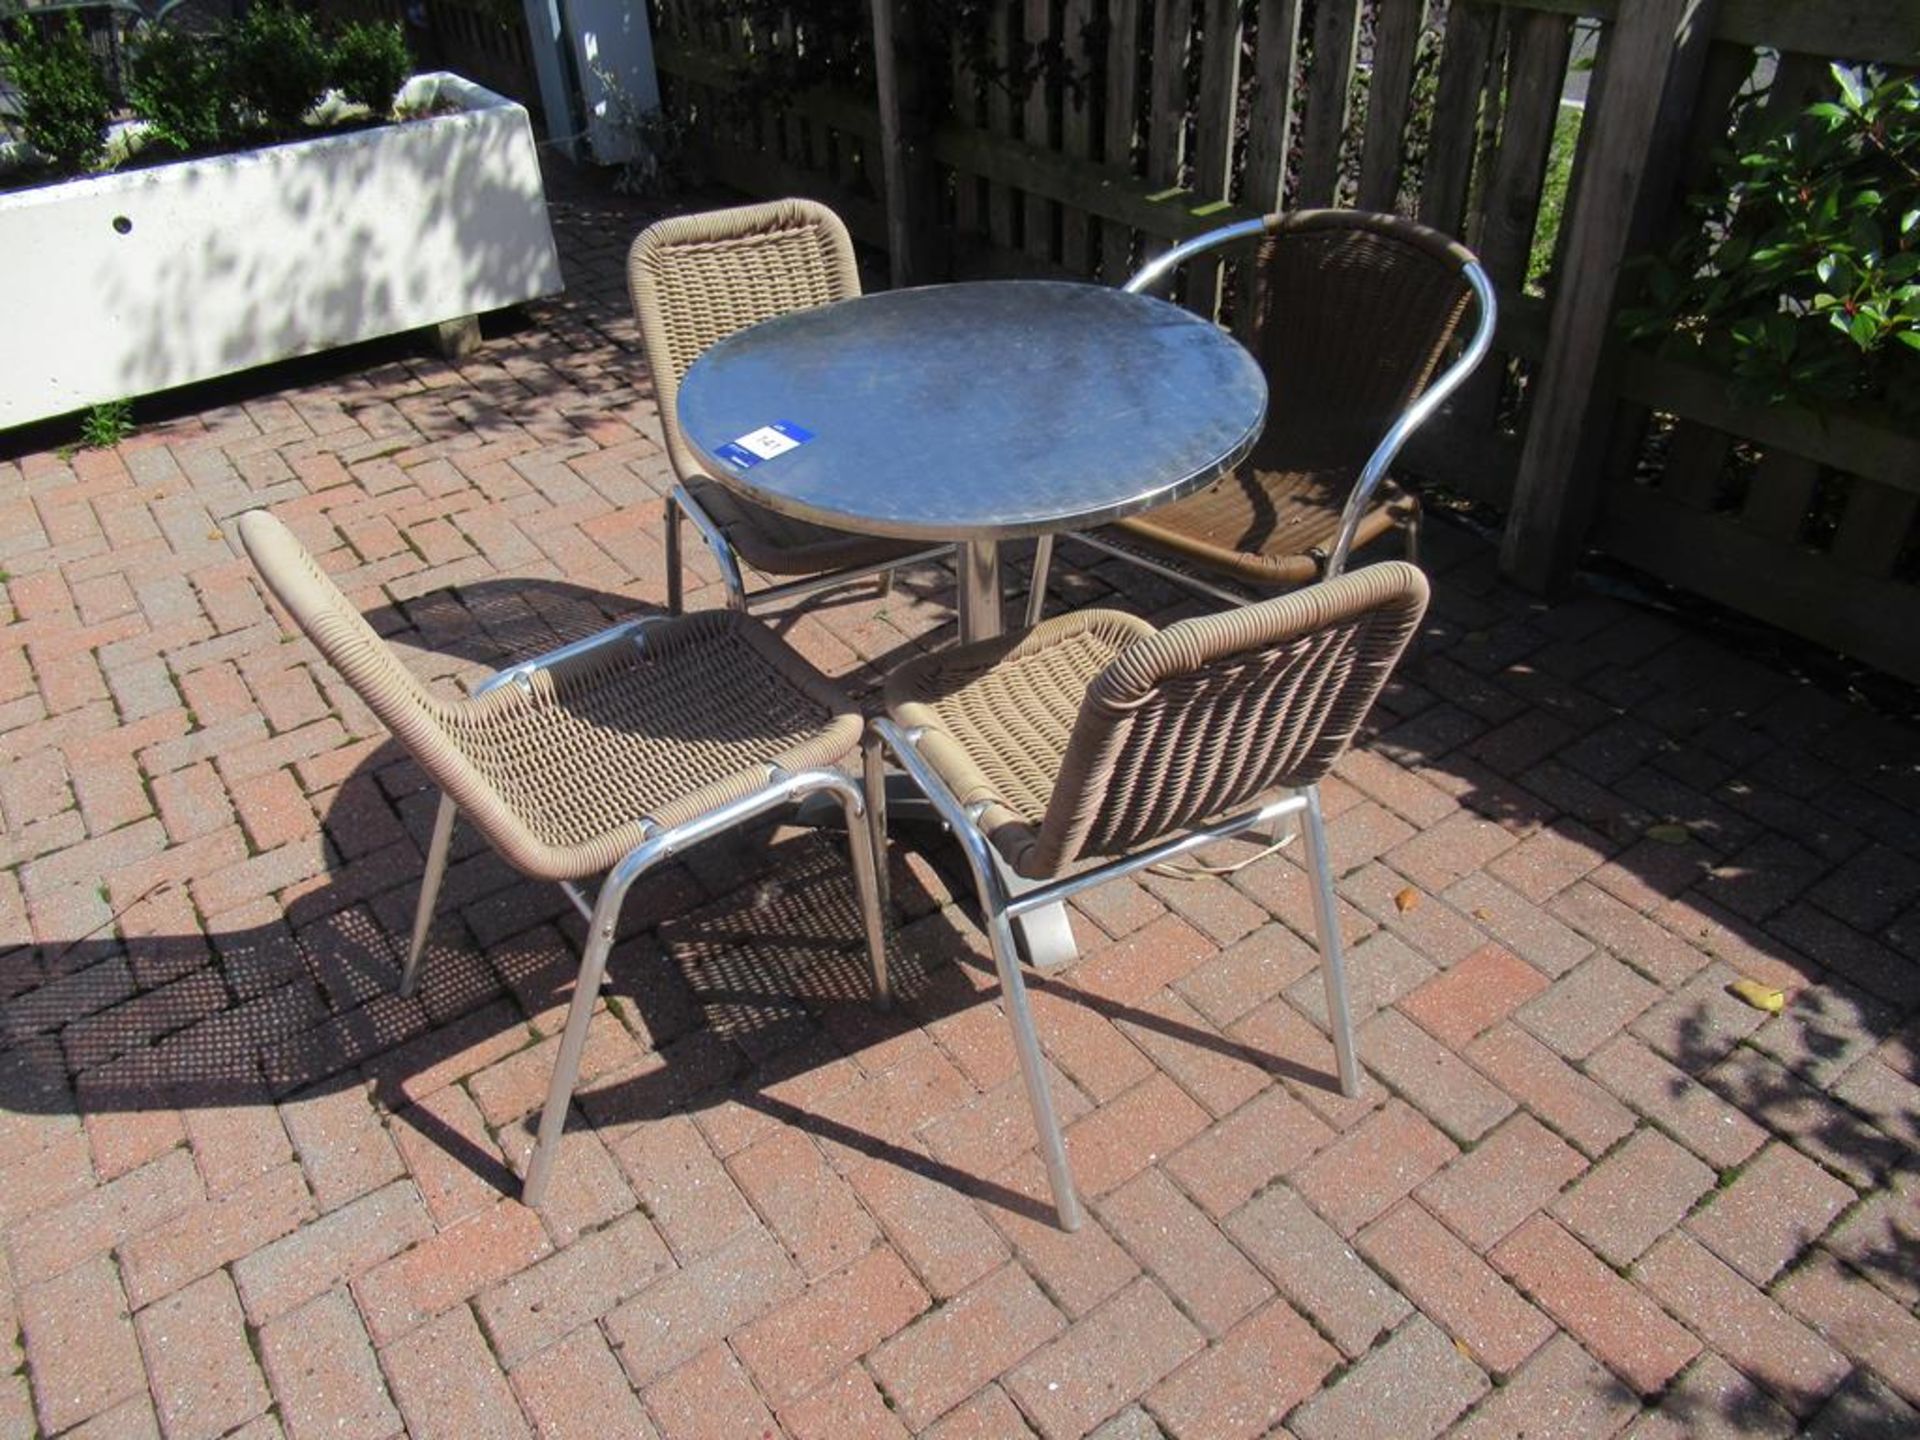 Metal Frame Circular Top Garden Table with 4 x Metal Framed Garden Chairs - Image 3 of 3